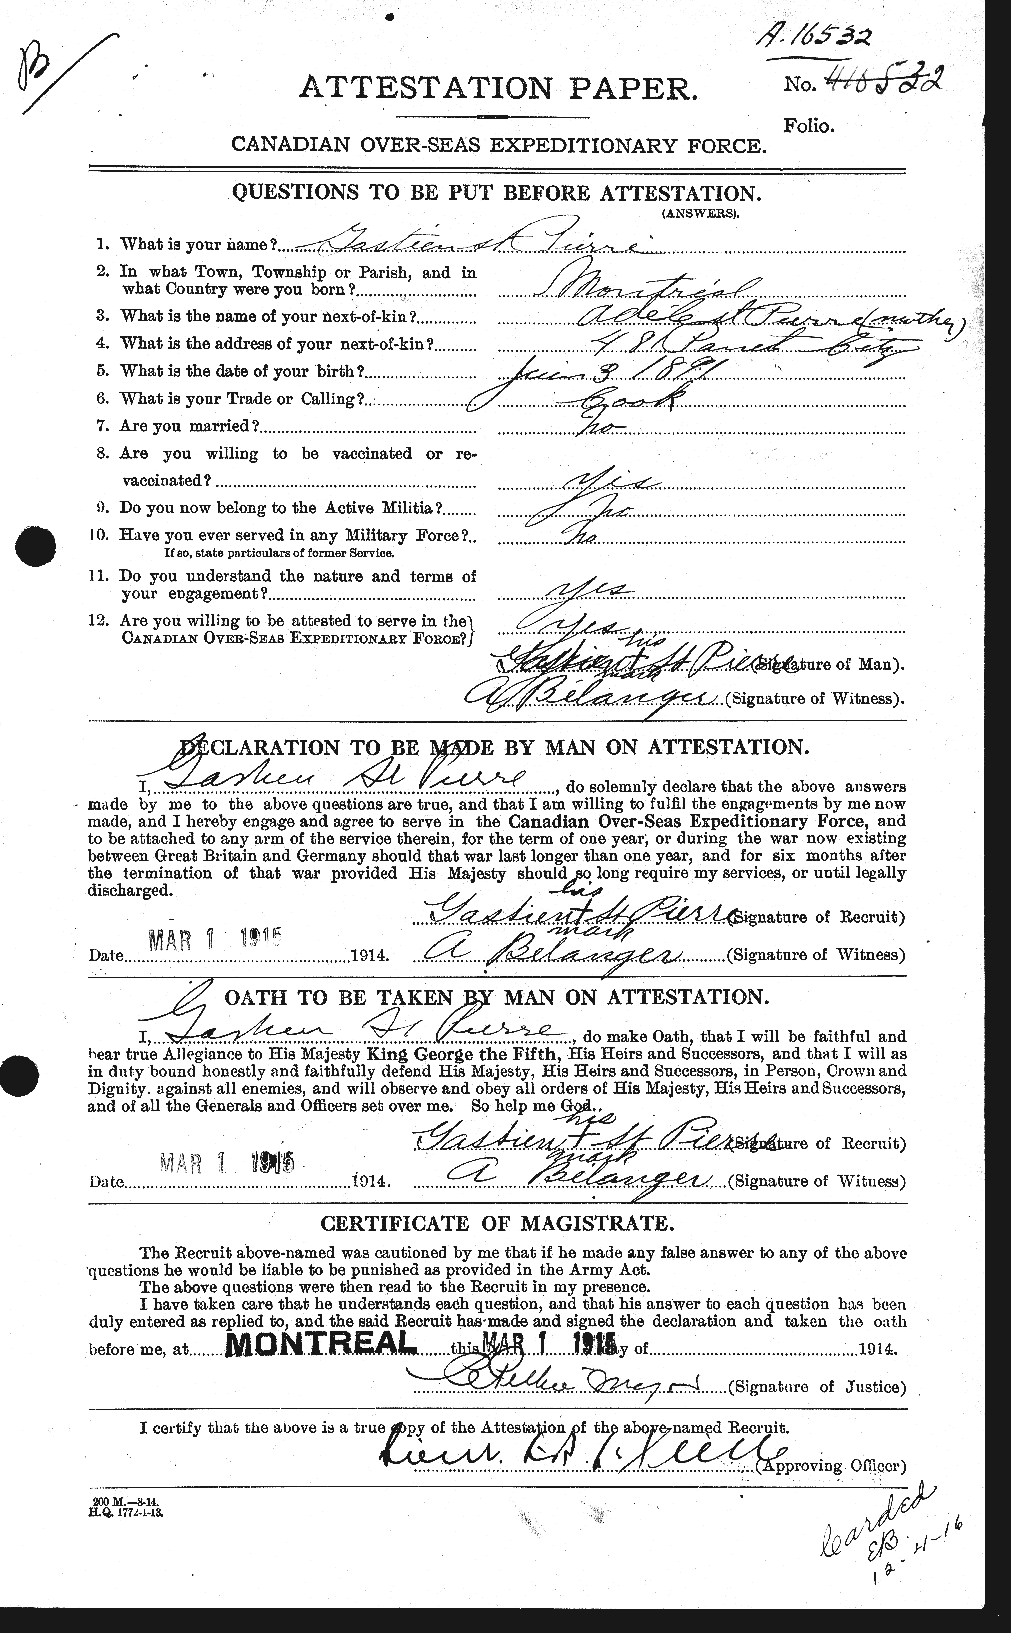 Personnel Records of the First World War - CEF 077820a